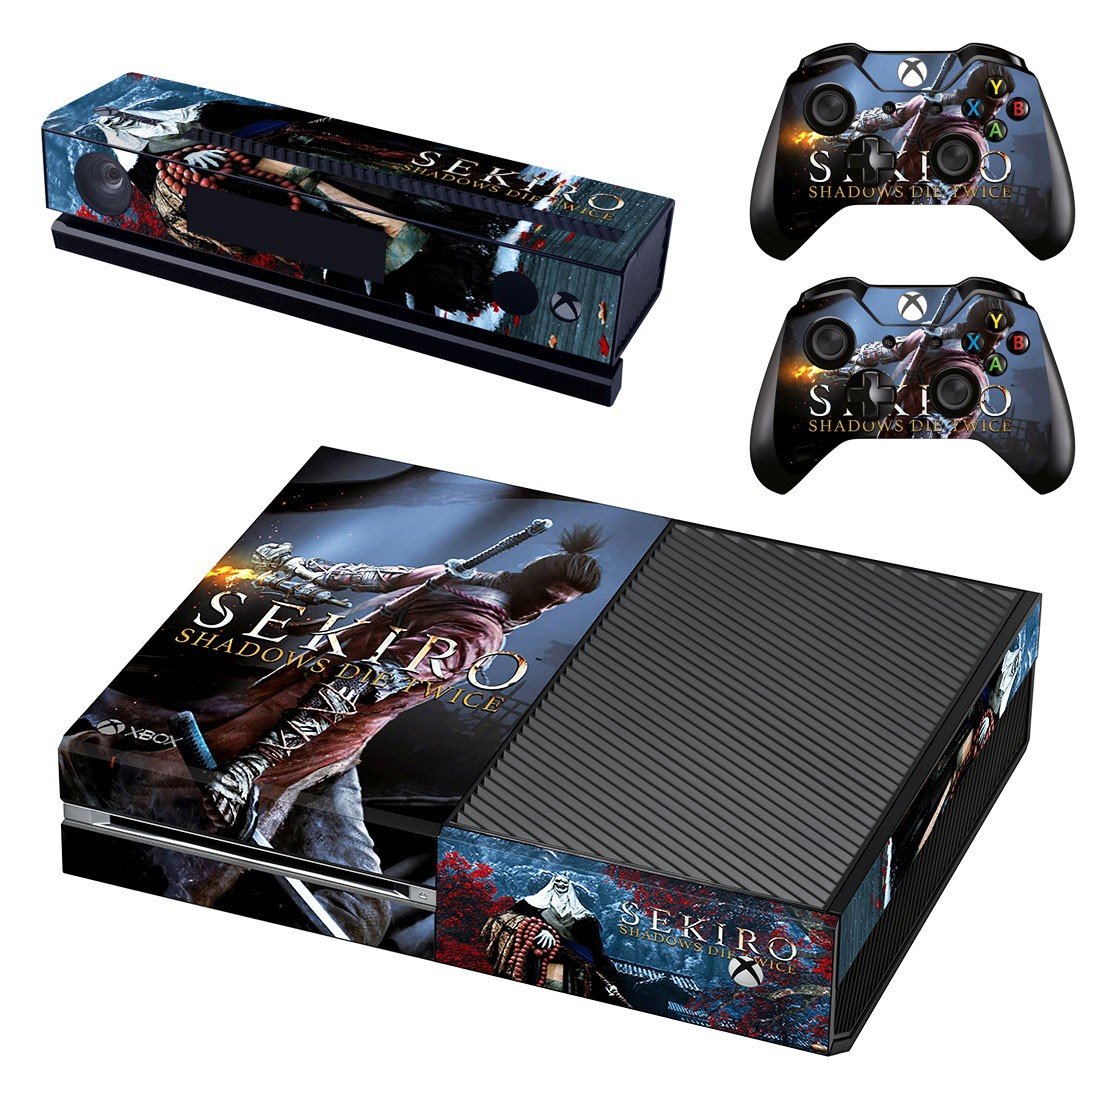 Xbox One And Controllers Skin Cover Sekiro Shadows Die Twice